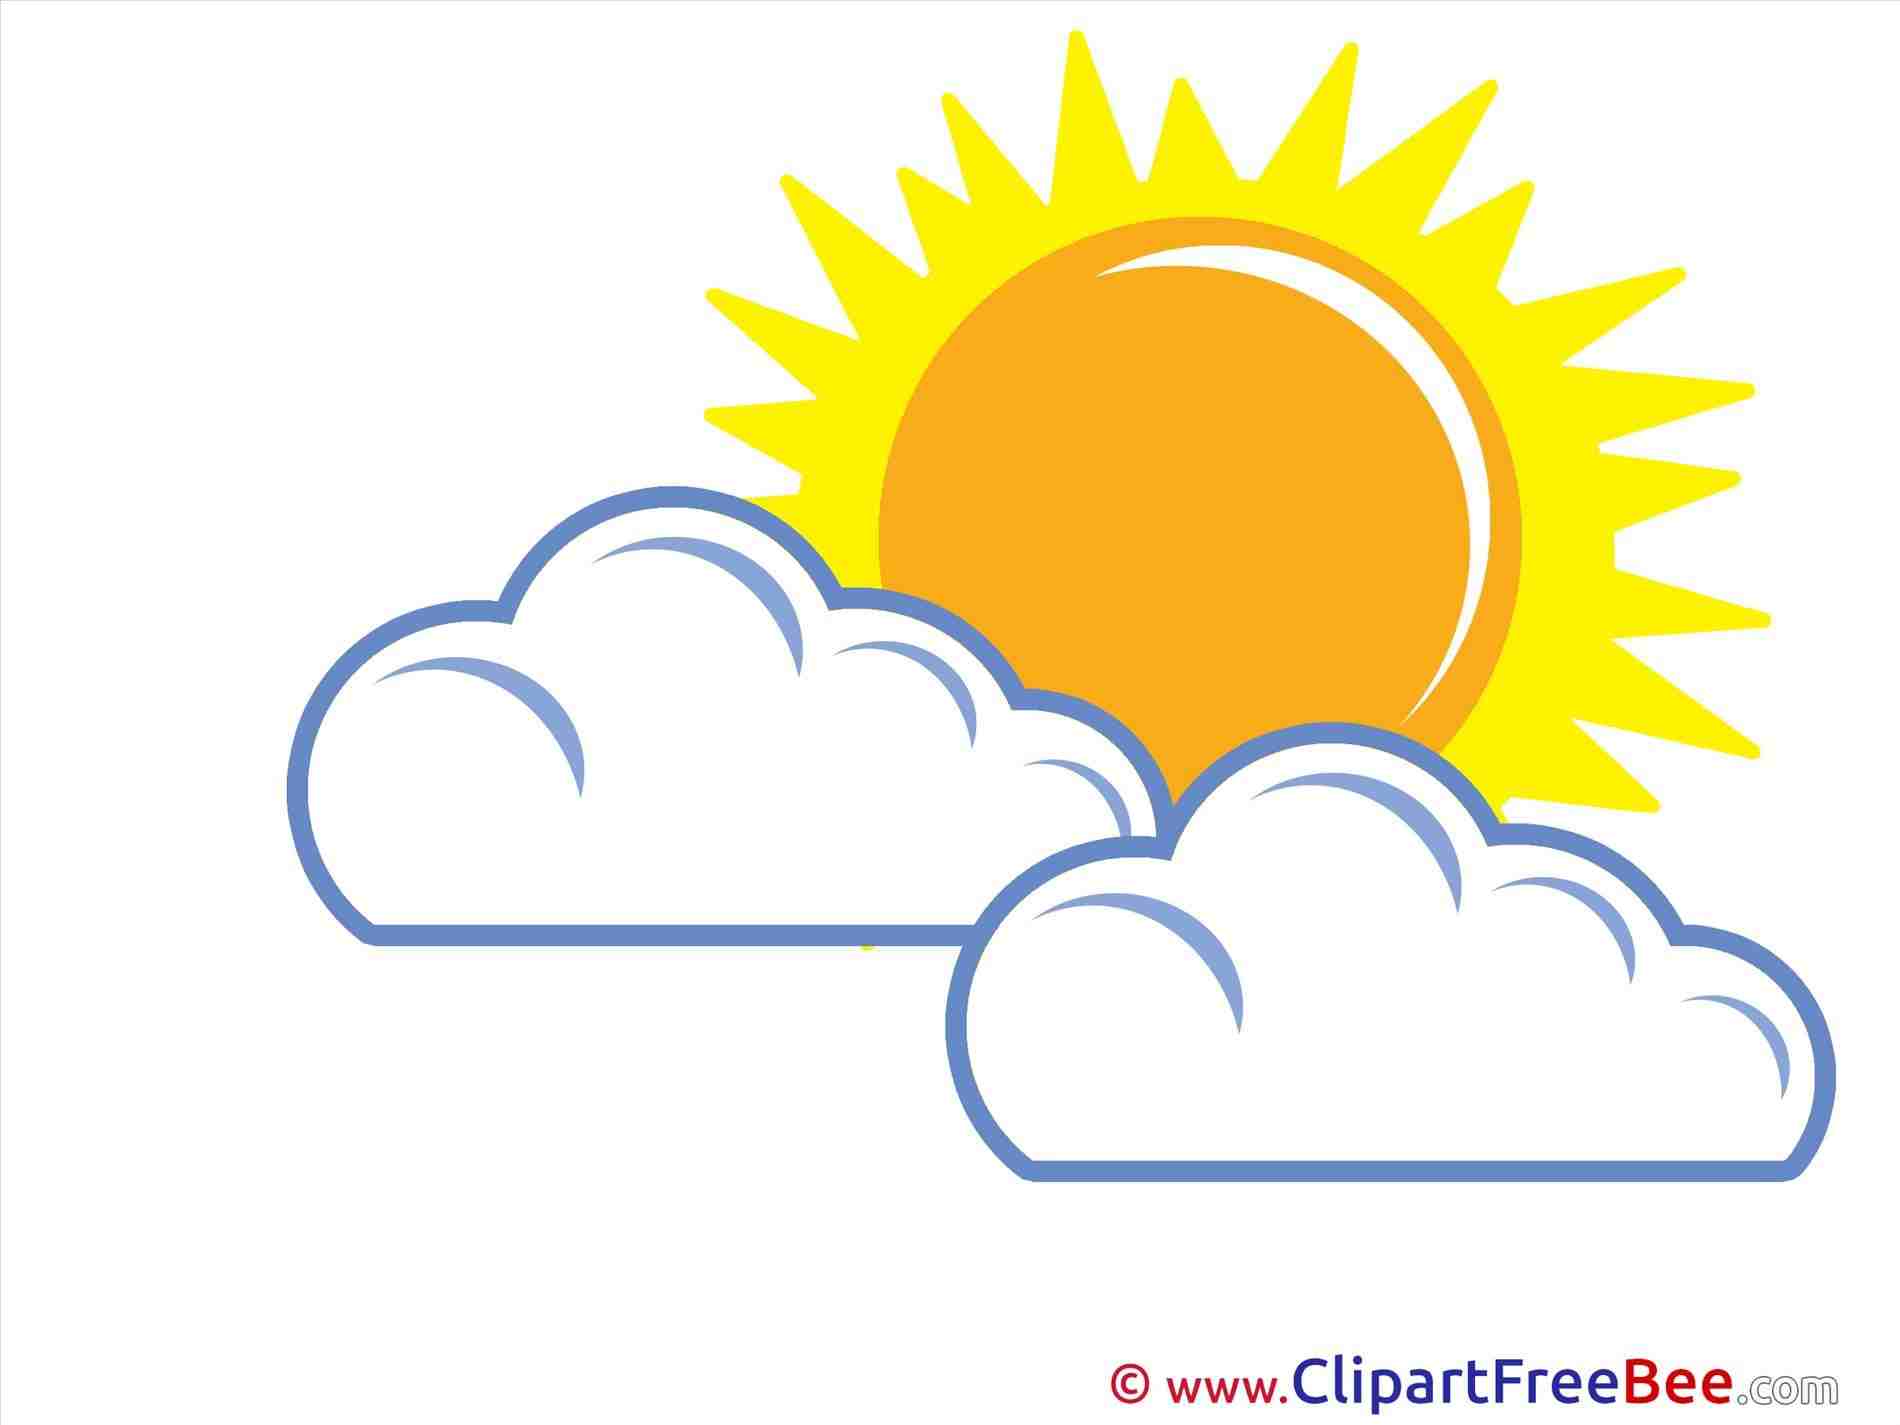 Warm Warm Weather Clipart weather sun clouds » Clipart Station.